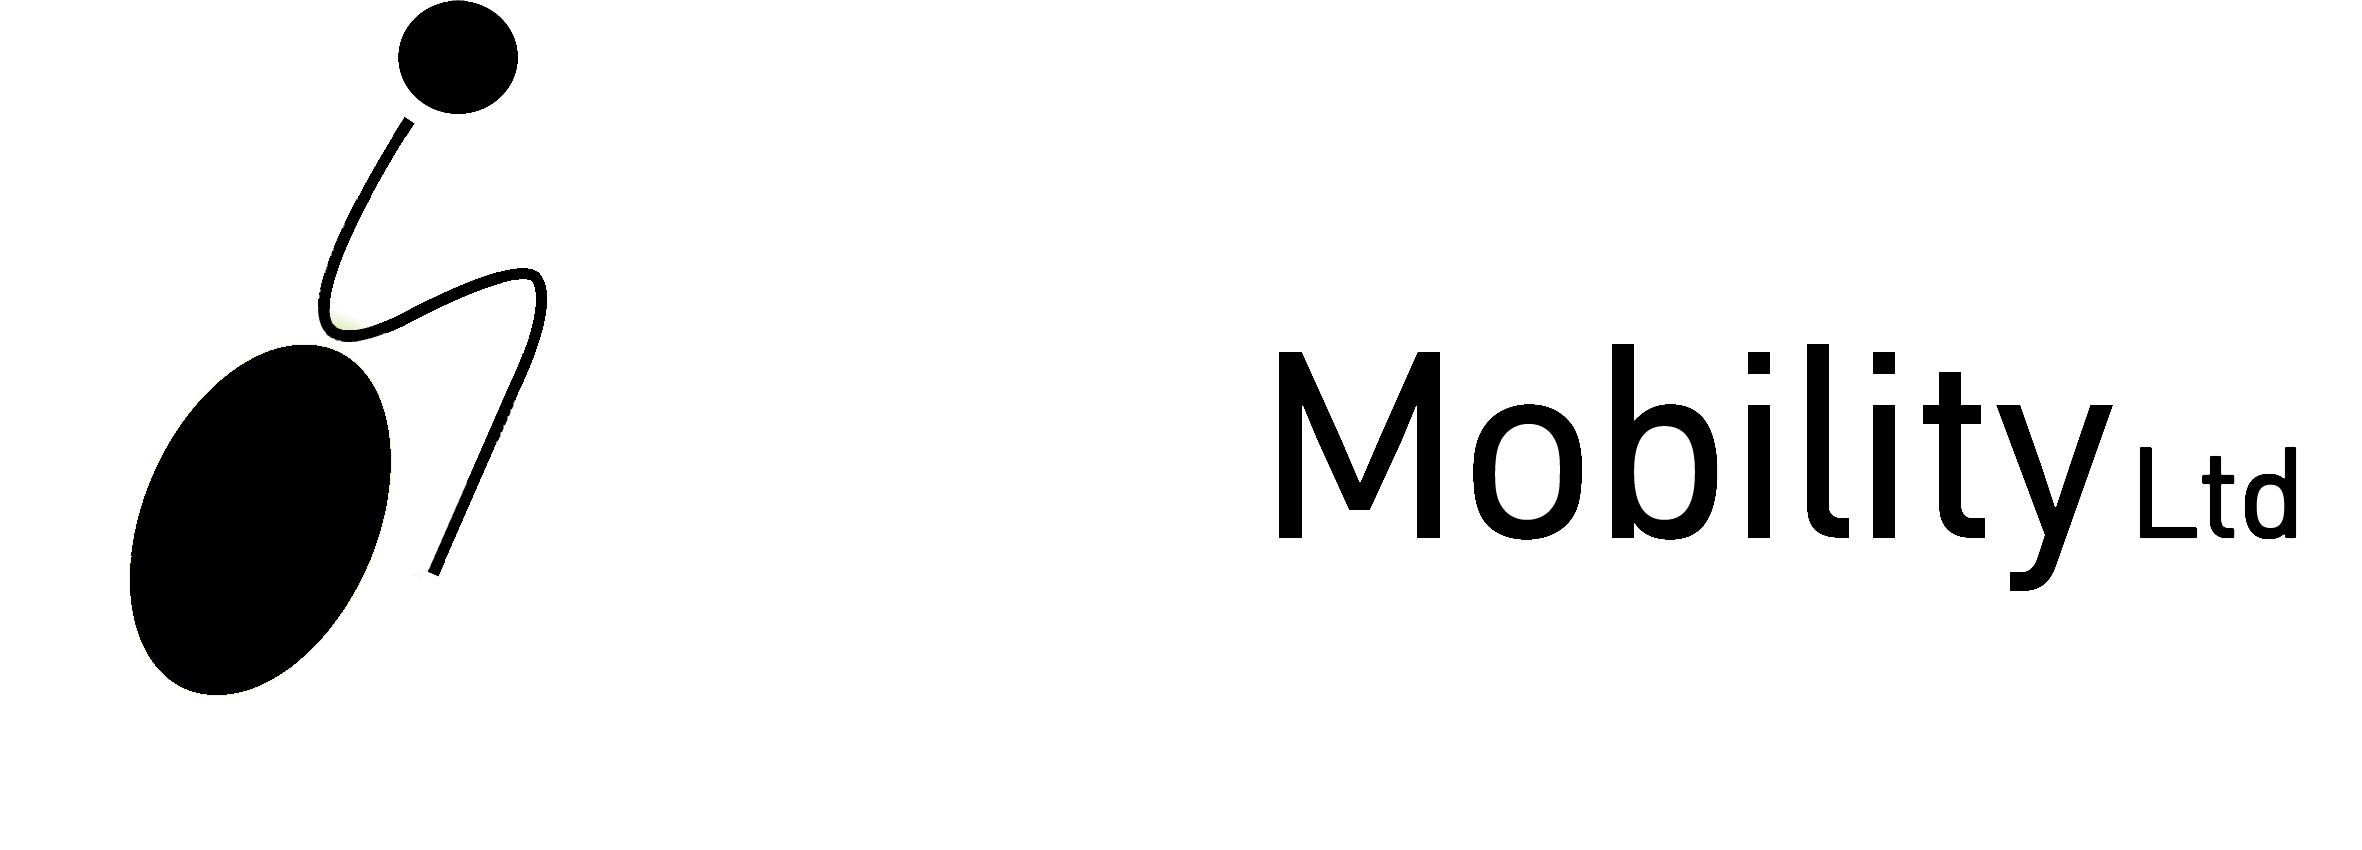 Solutions Mobility Ltd